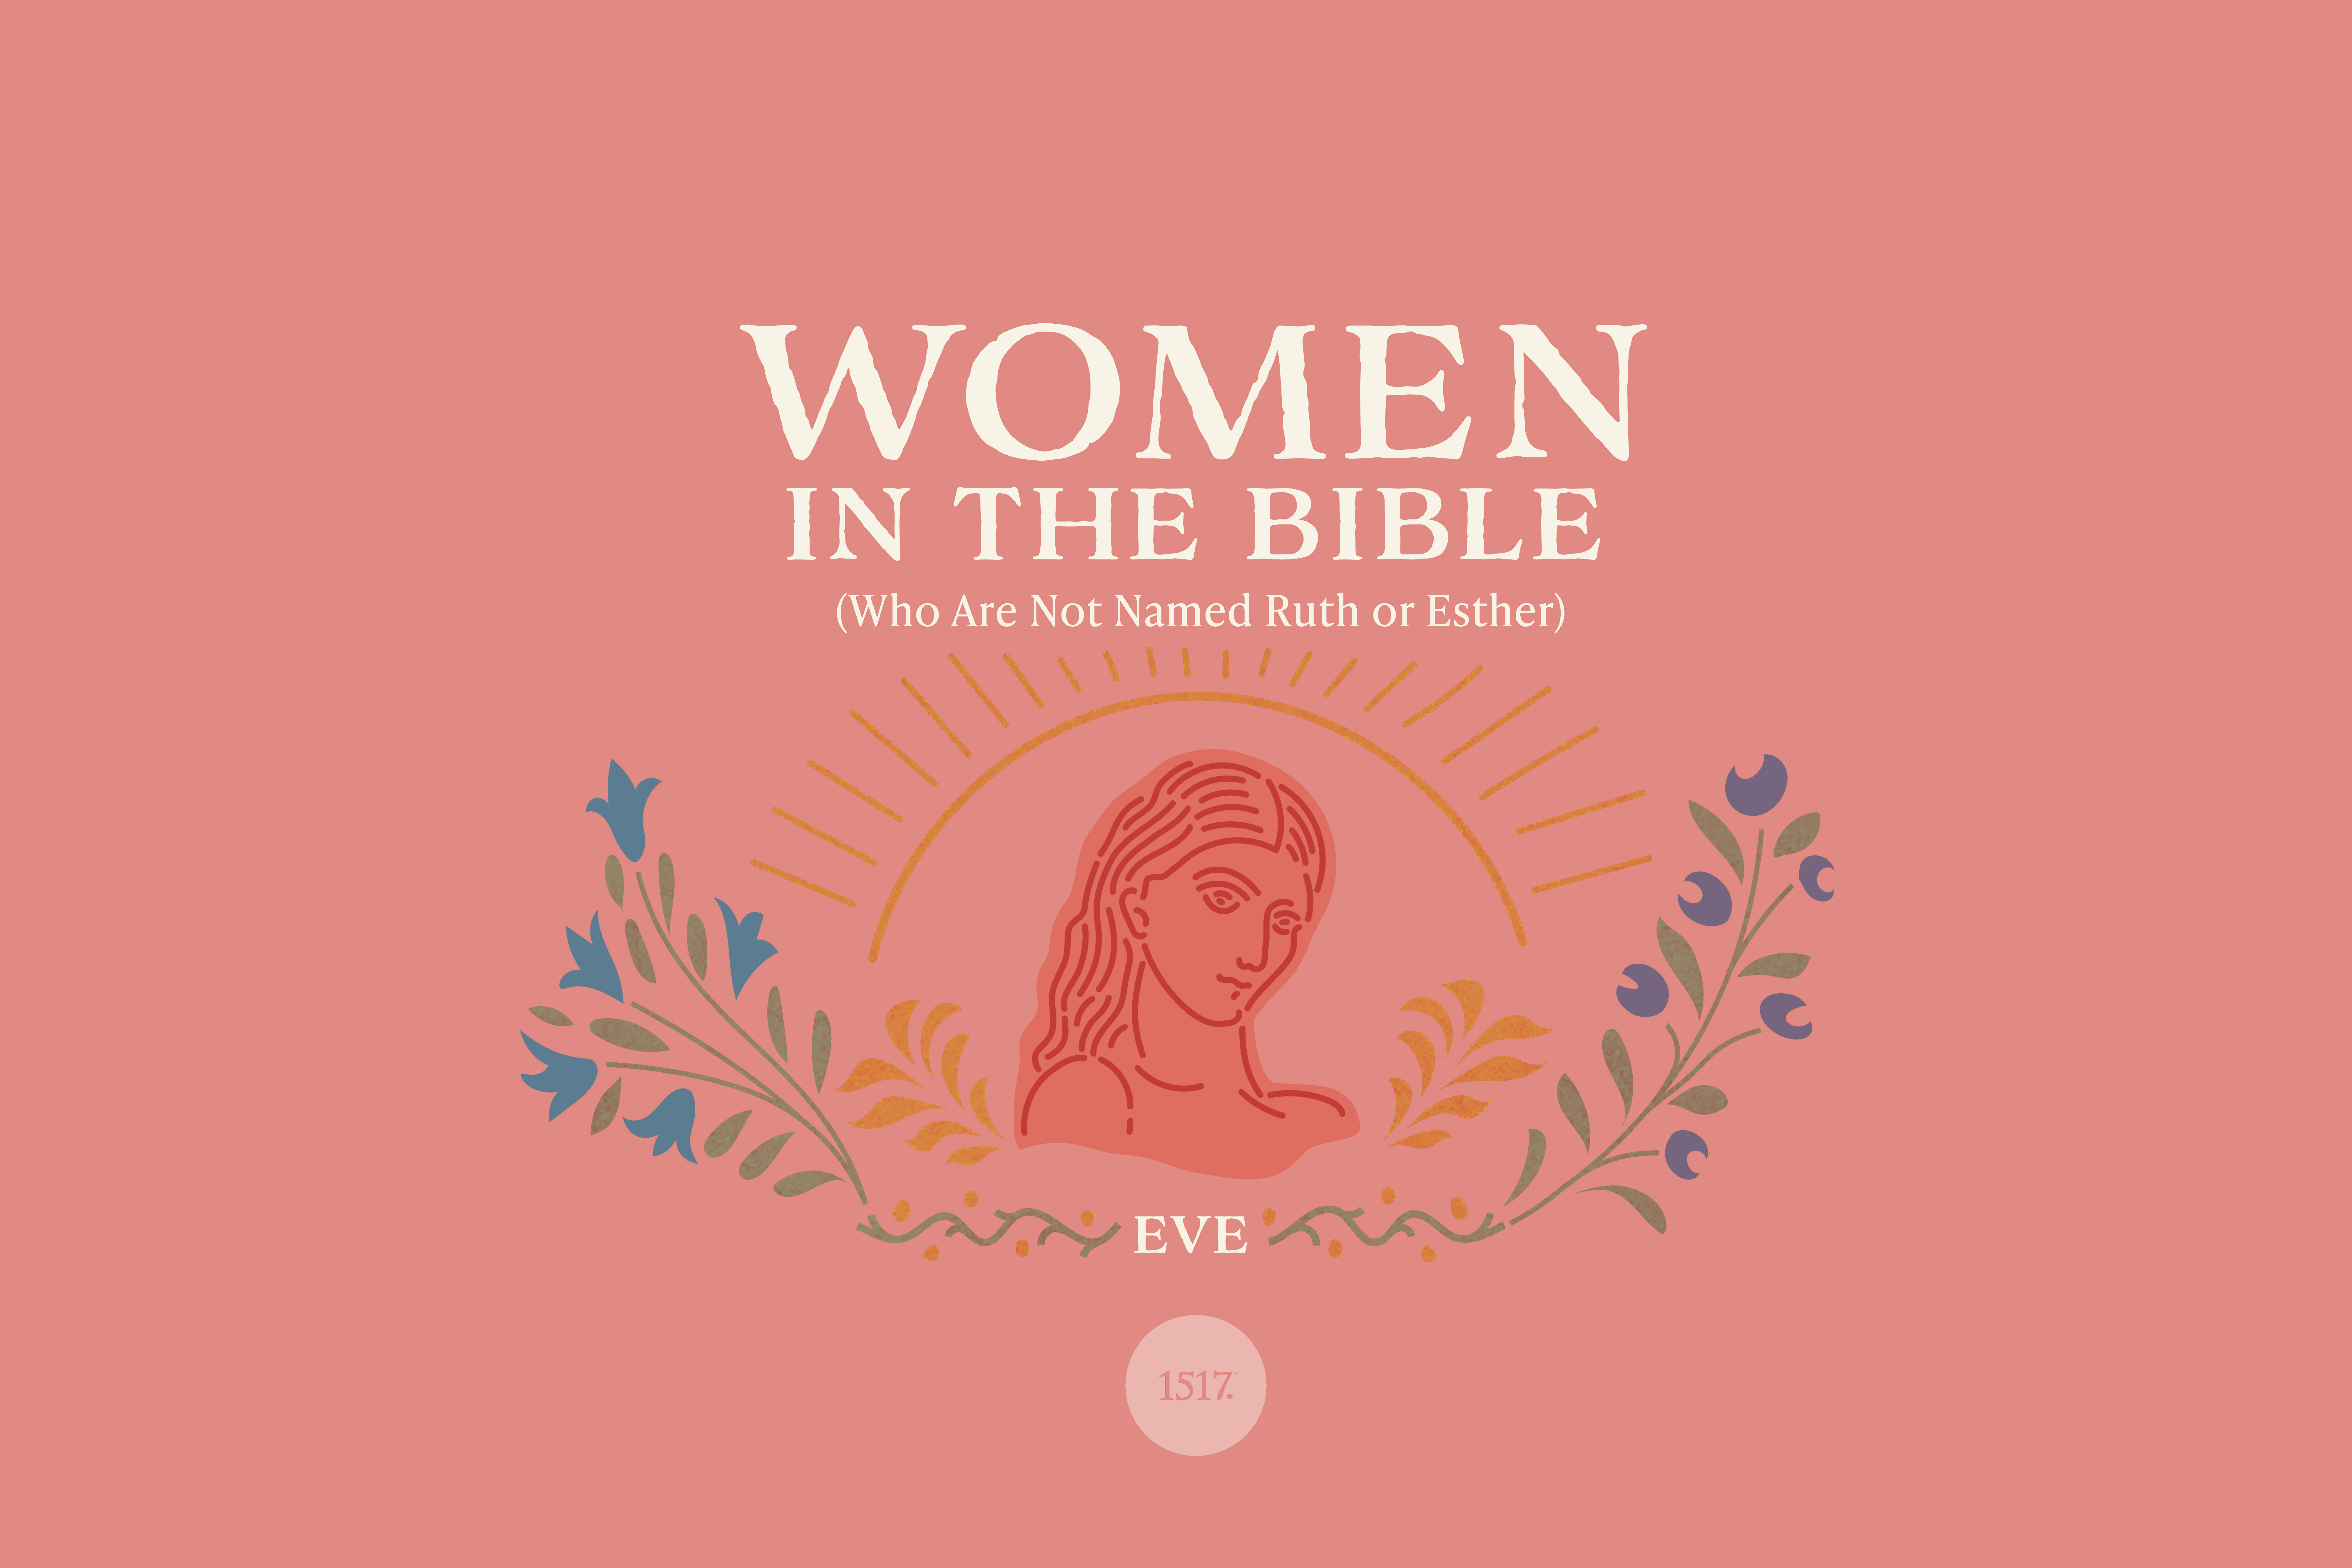 Eve: A Most Holy Woman, Full of Faith and Love